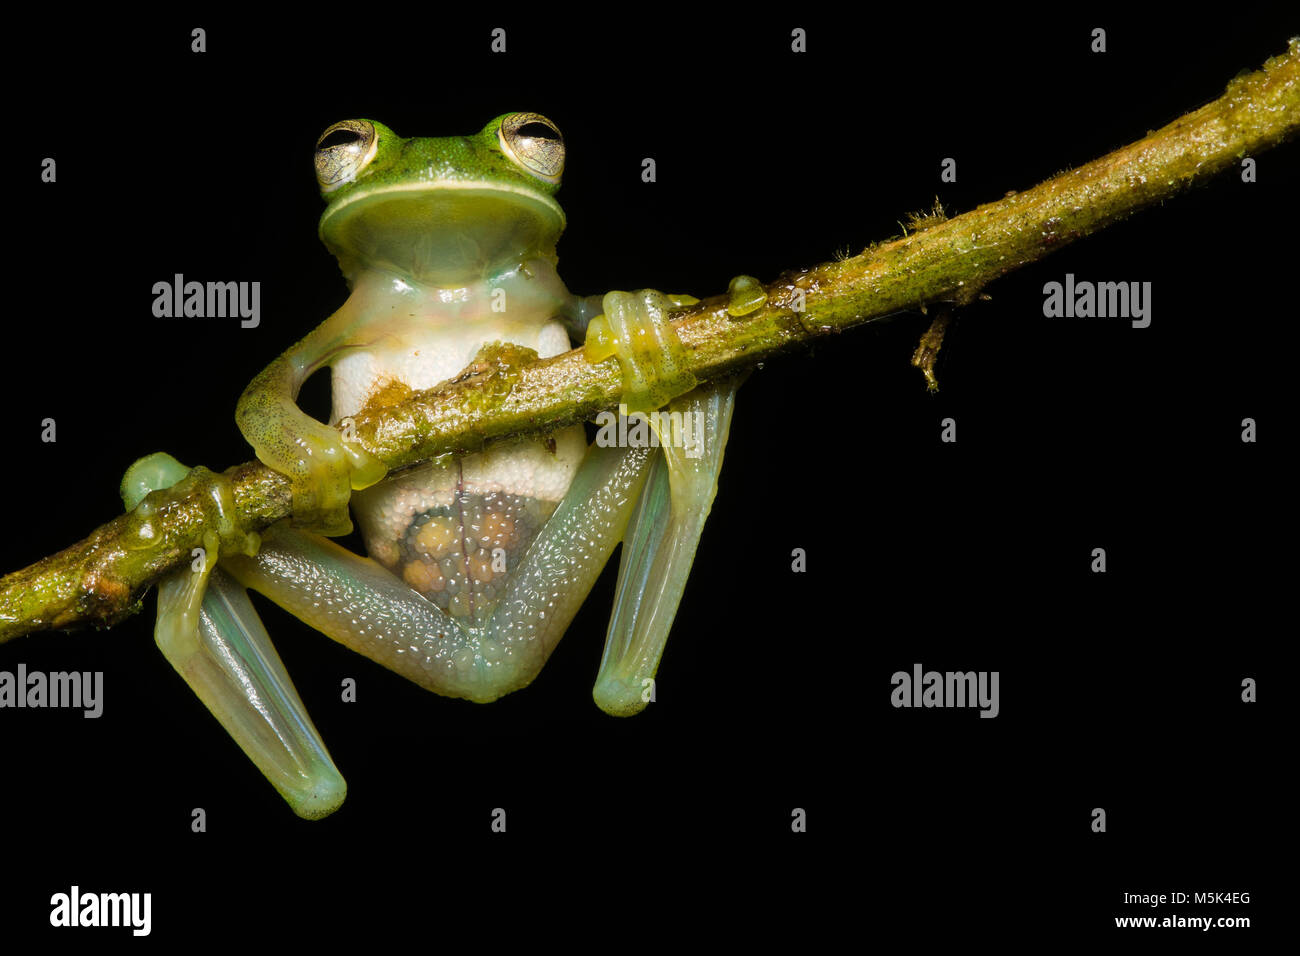 A small glasss frog (Espadarana prosoblepon) climbs on a branch, it is possible to see the eggs inside through her transparent skin. Stock Photo